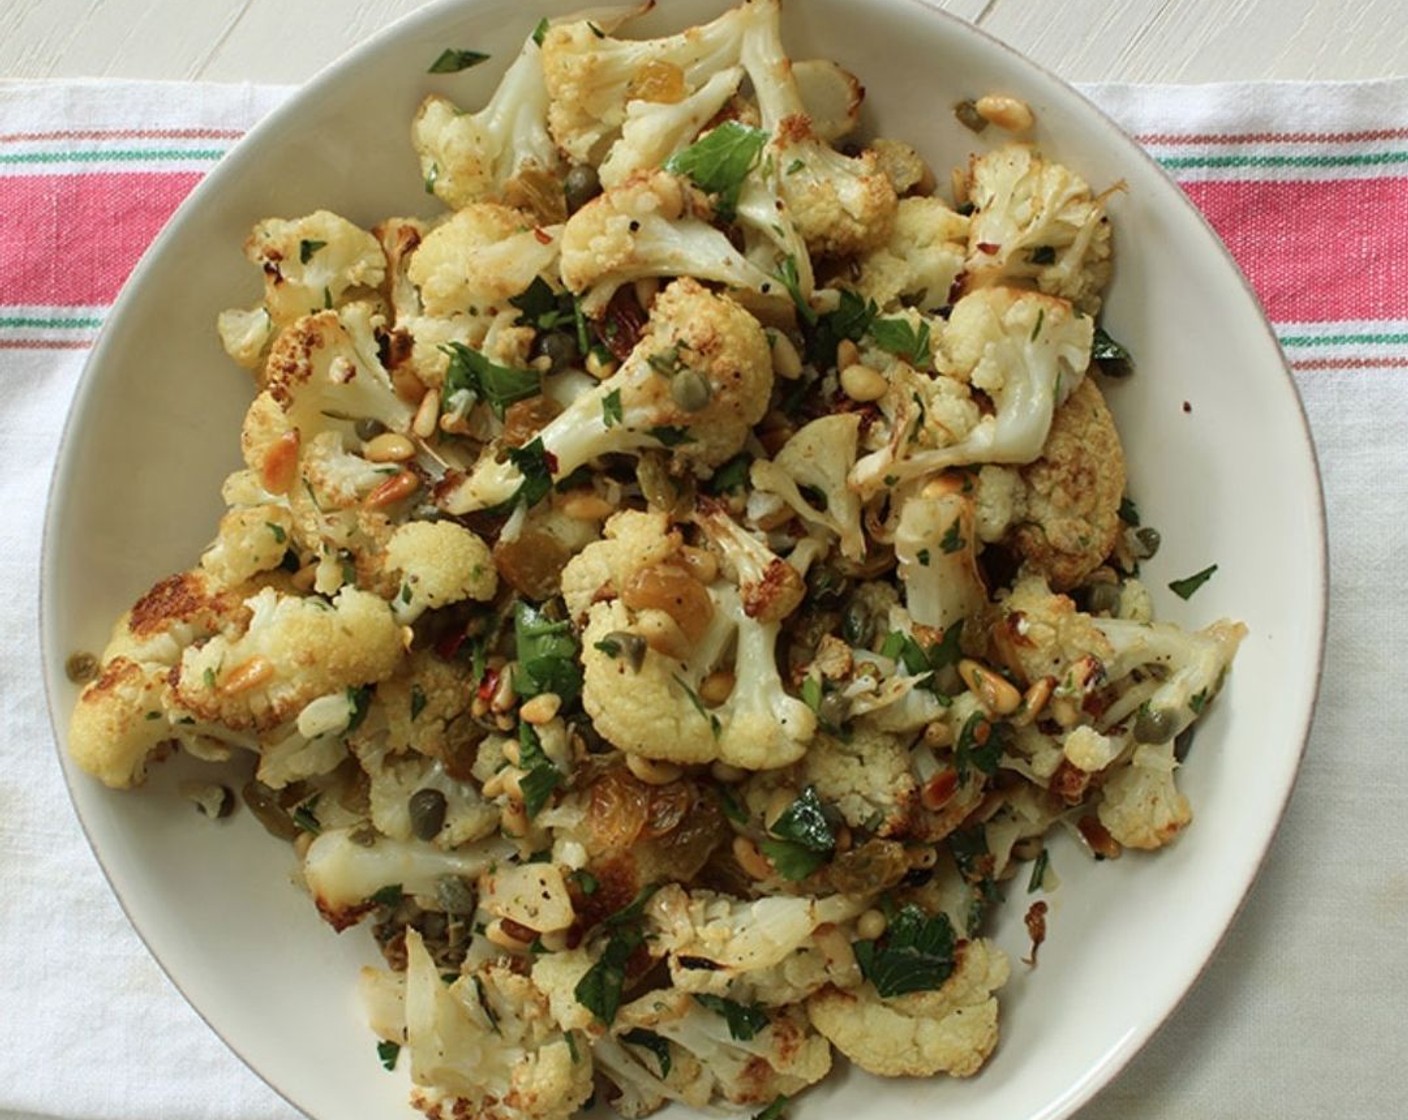 step 7 When the cauliflower is done, add the caper mixture, toasted pine nuts, Fresh Parsley (1/4 cup), and Crushed Red Pepper Flakes (1/4 tsp) to the sheet pan. Toss well, sprinkle generously with additional salt, then transfer to a shallow dish or platter and serve.